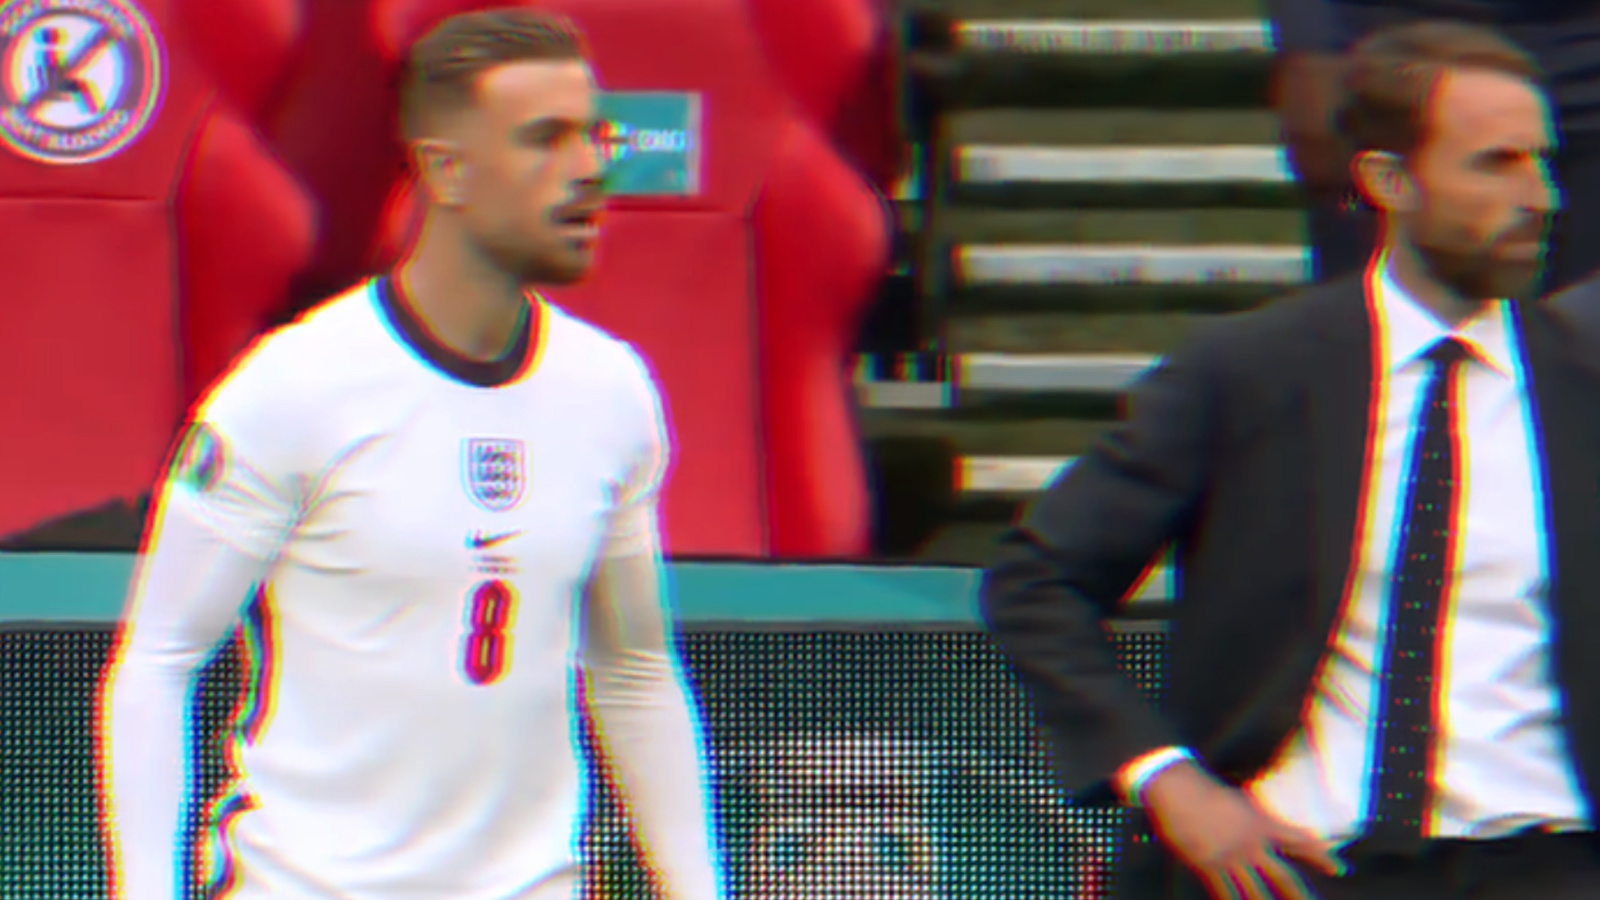 Watch: Jordan Henderson shows he’s part of the pack with passionate reaction